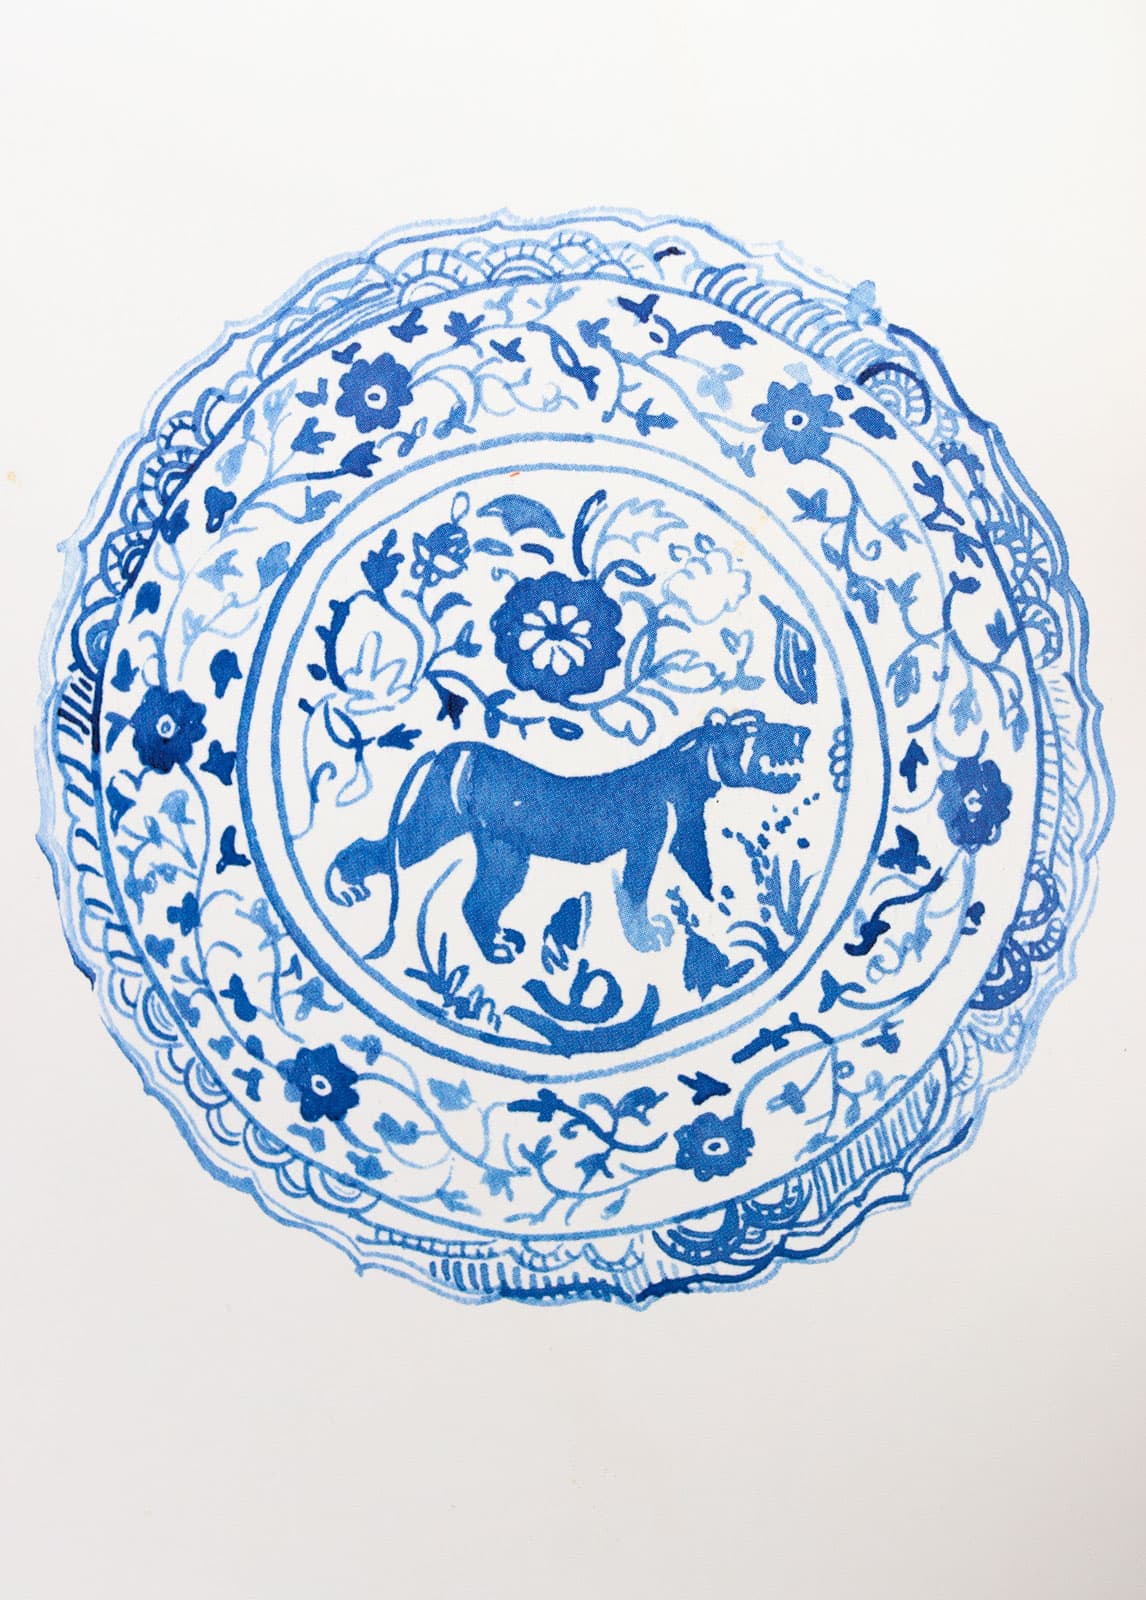 blue plate illustration from The Simple Art of Rice: Persian-Style Shrimp and Rice recipe